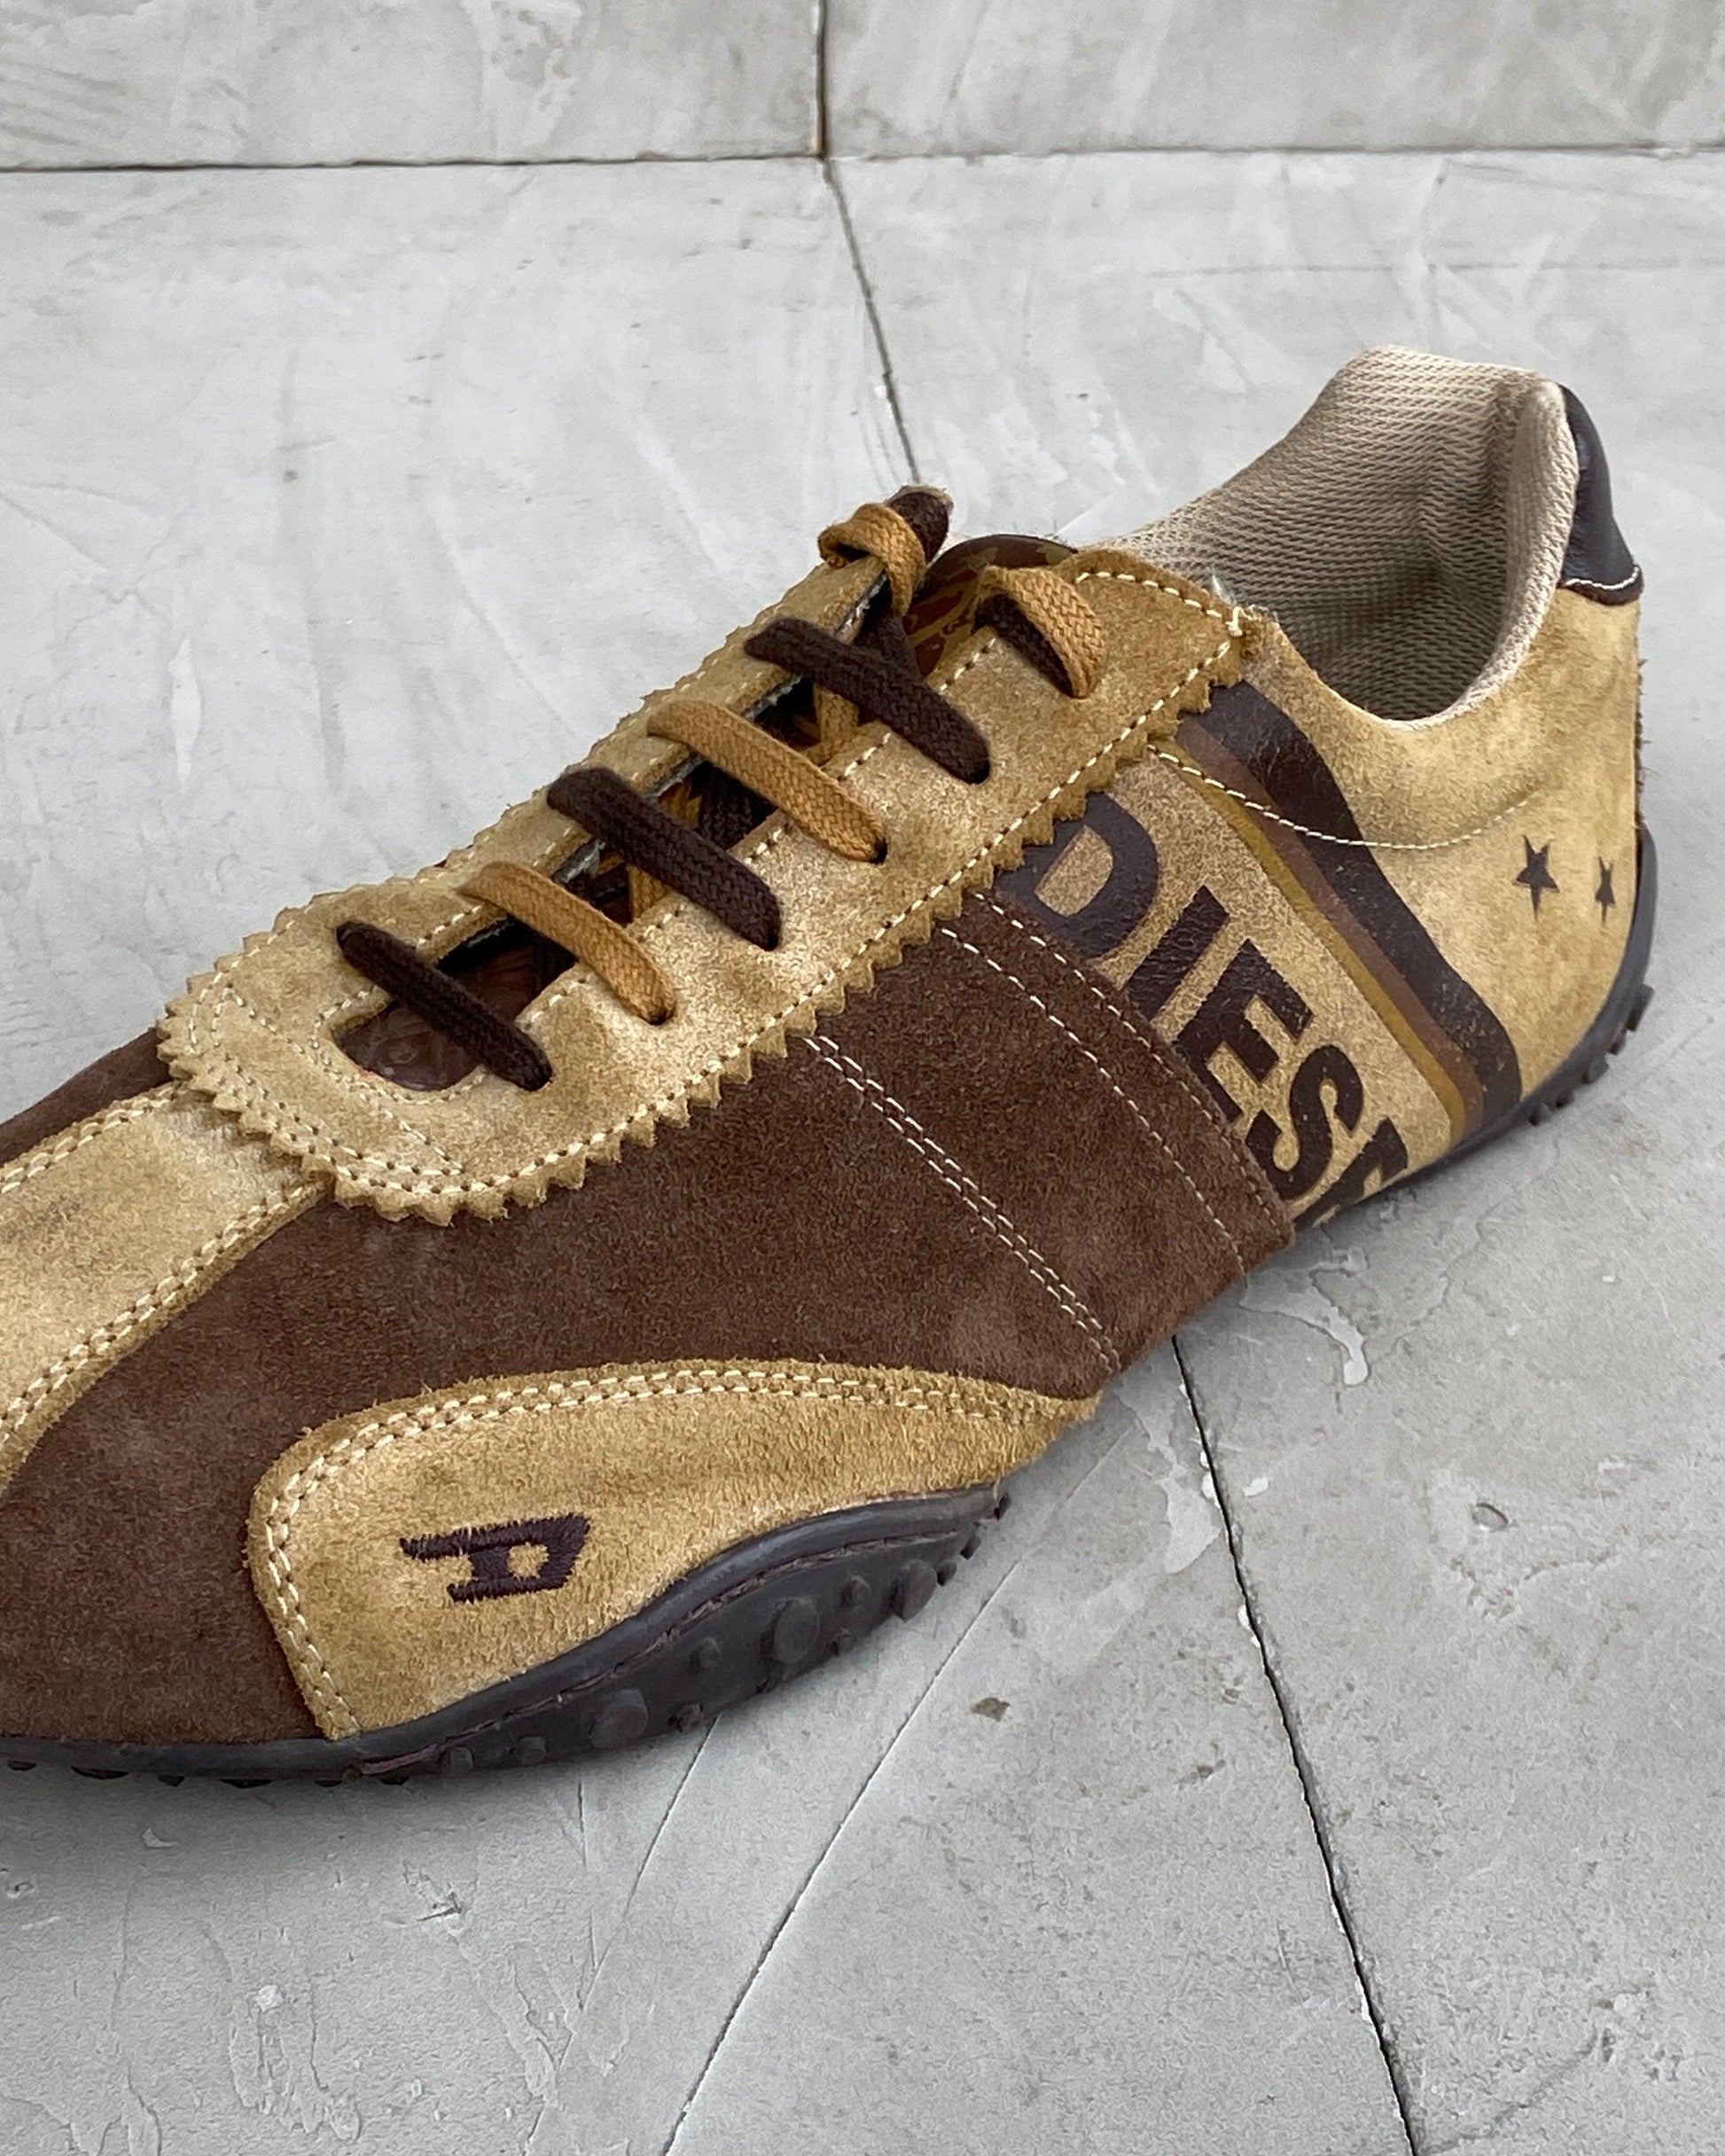 DIESEL 2000'S BUBBLE SOLE STAR SUEDE TRAINERS - EU 44 / UK 9.5 - Known Source